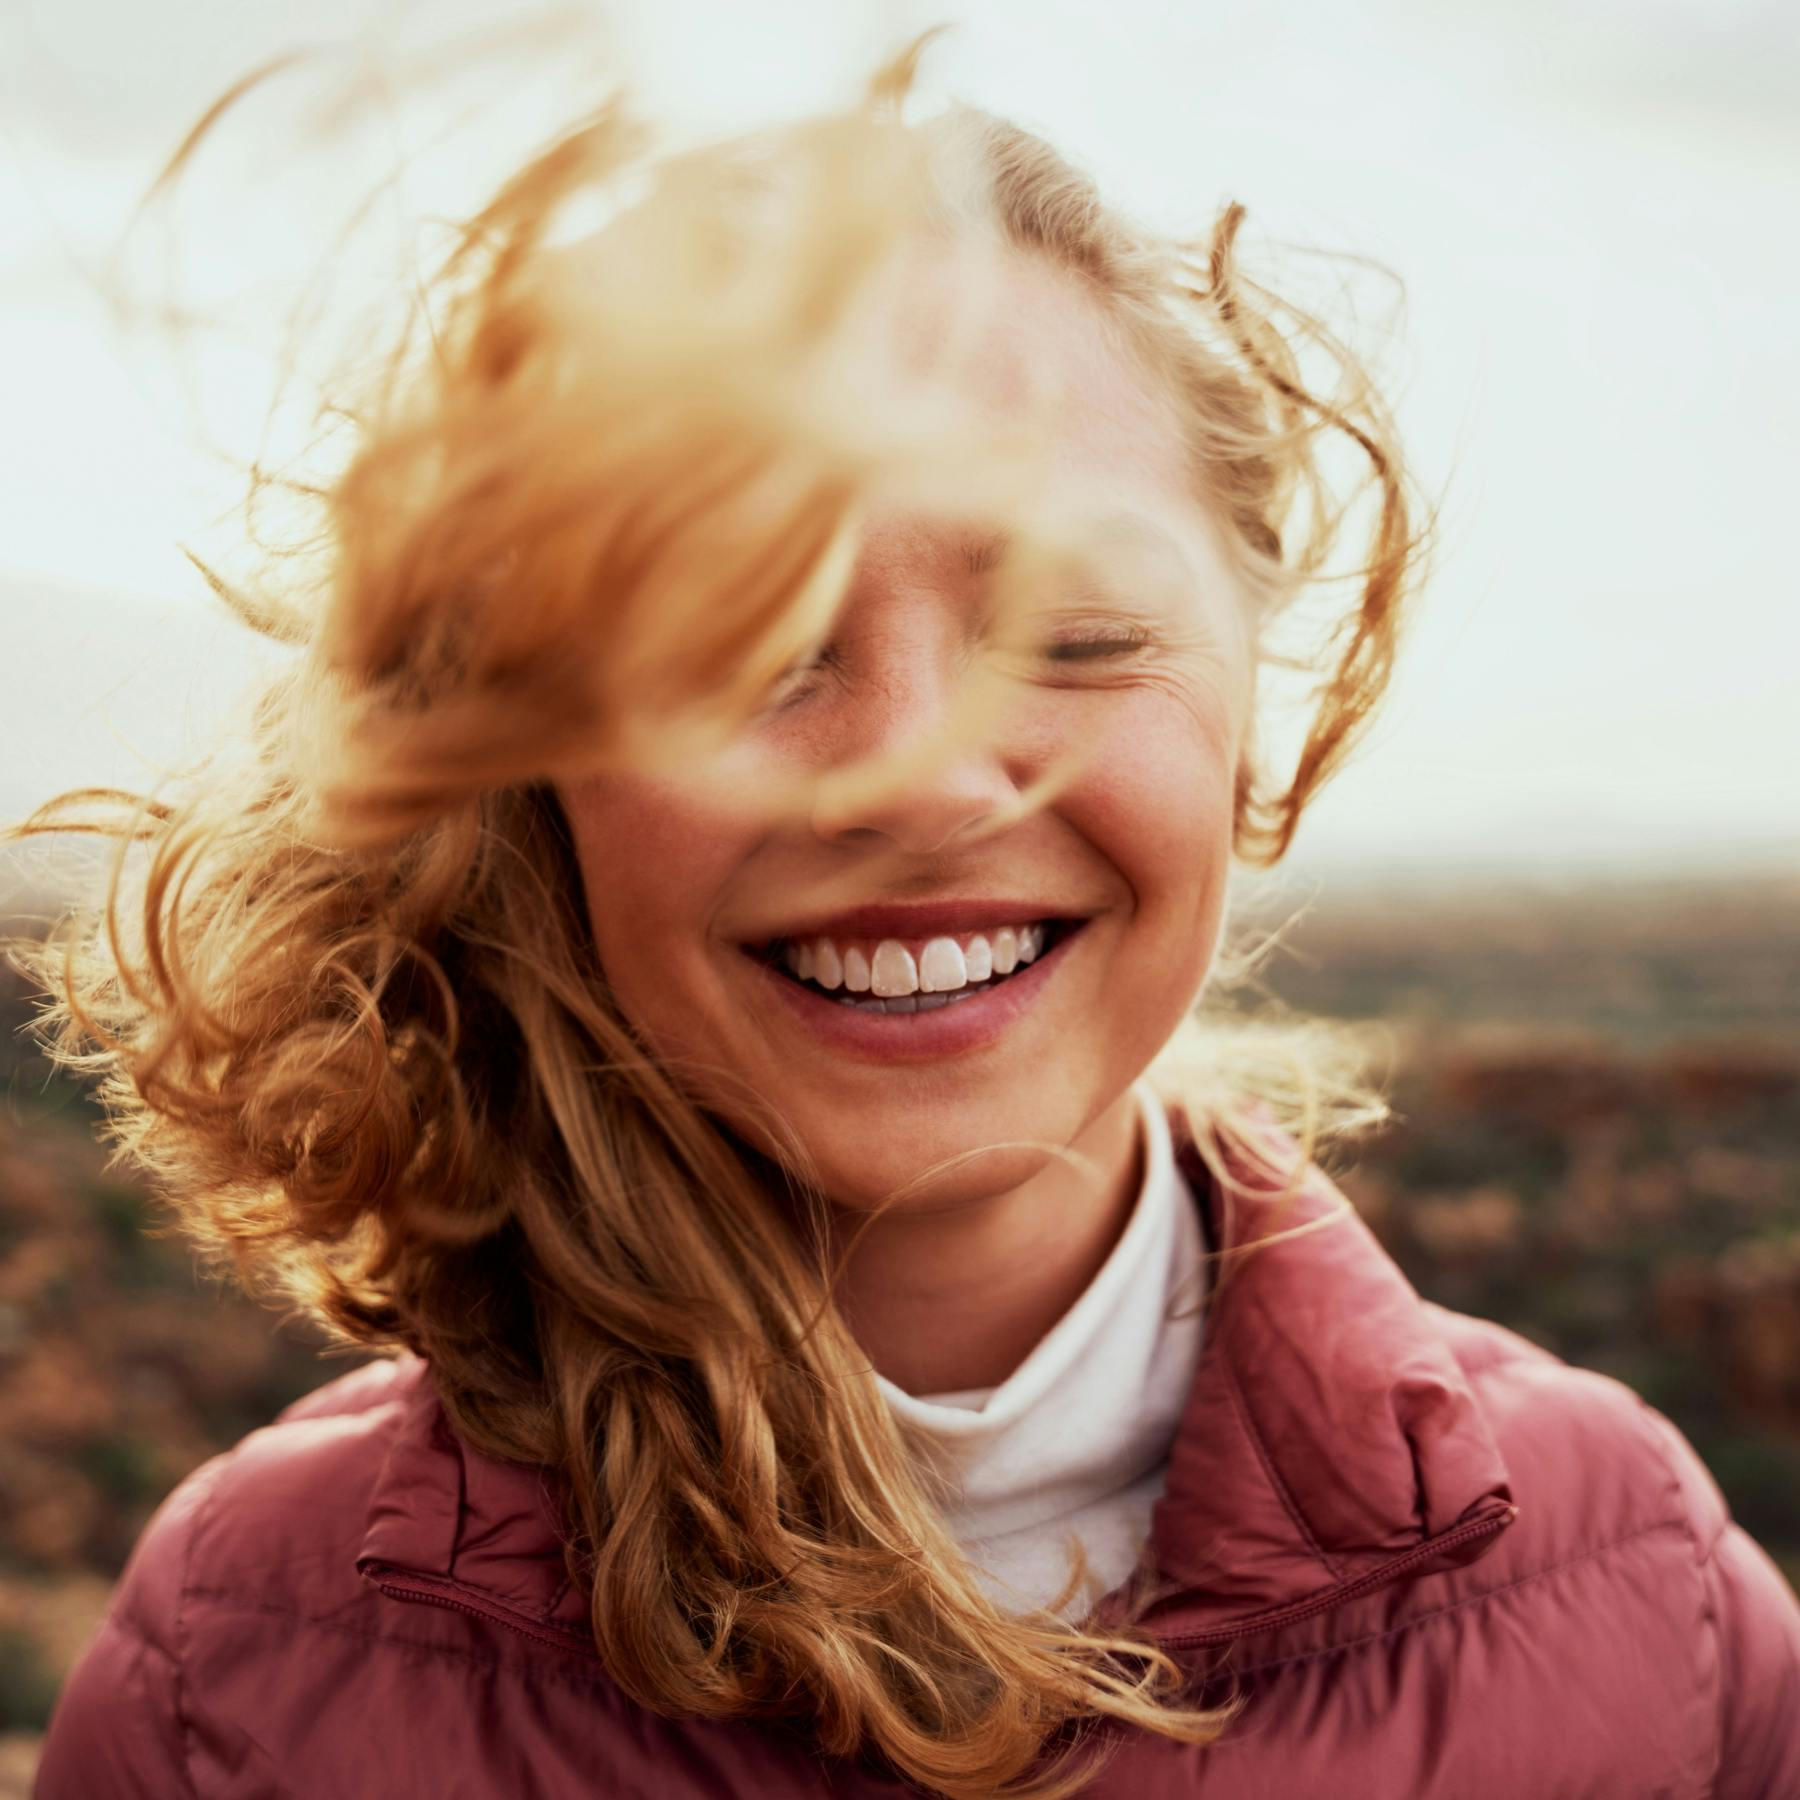 Woman outside smiling with hair blowing around her face.